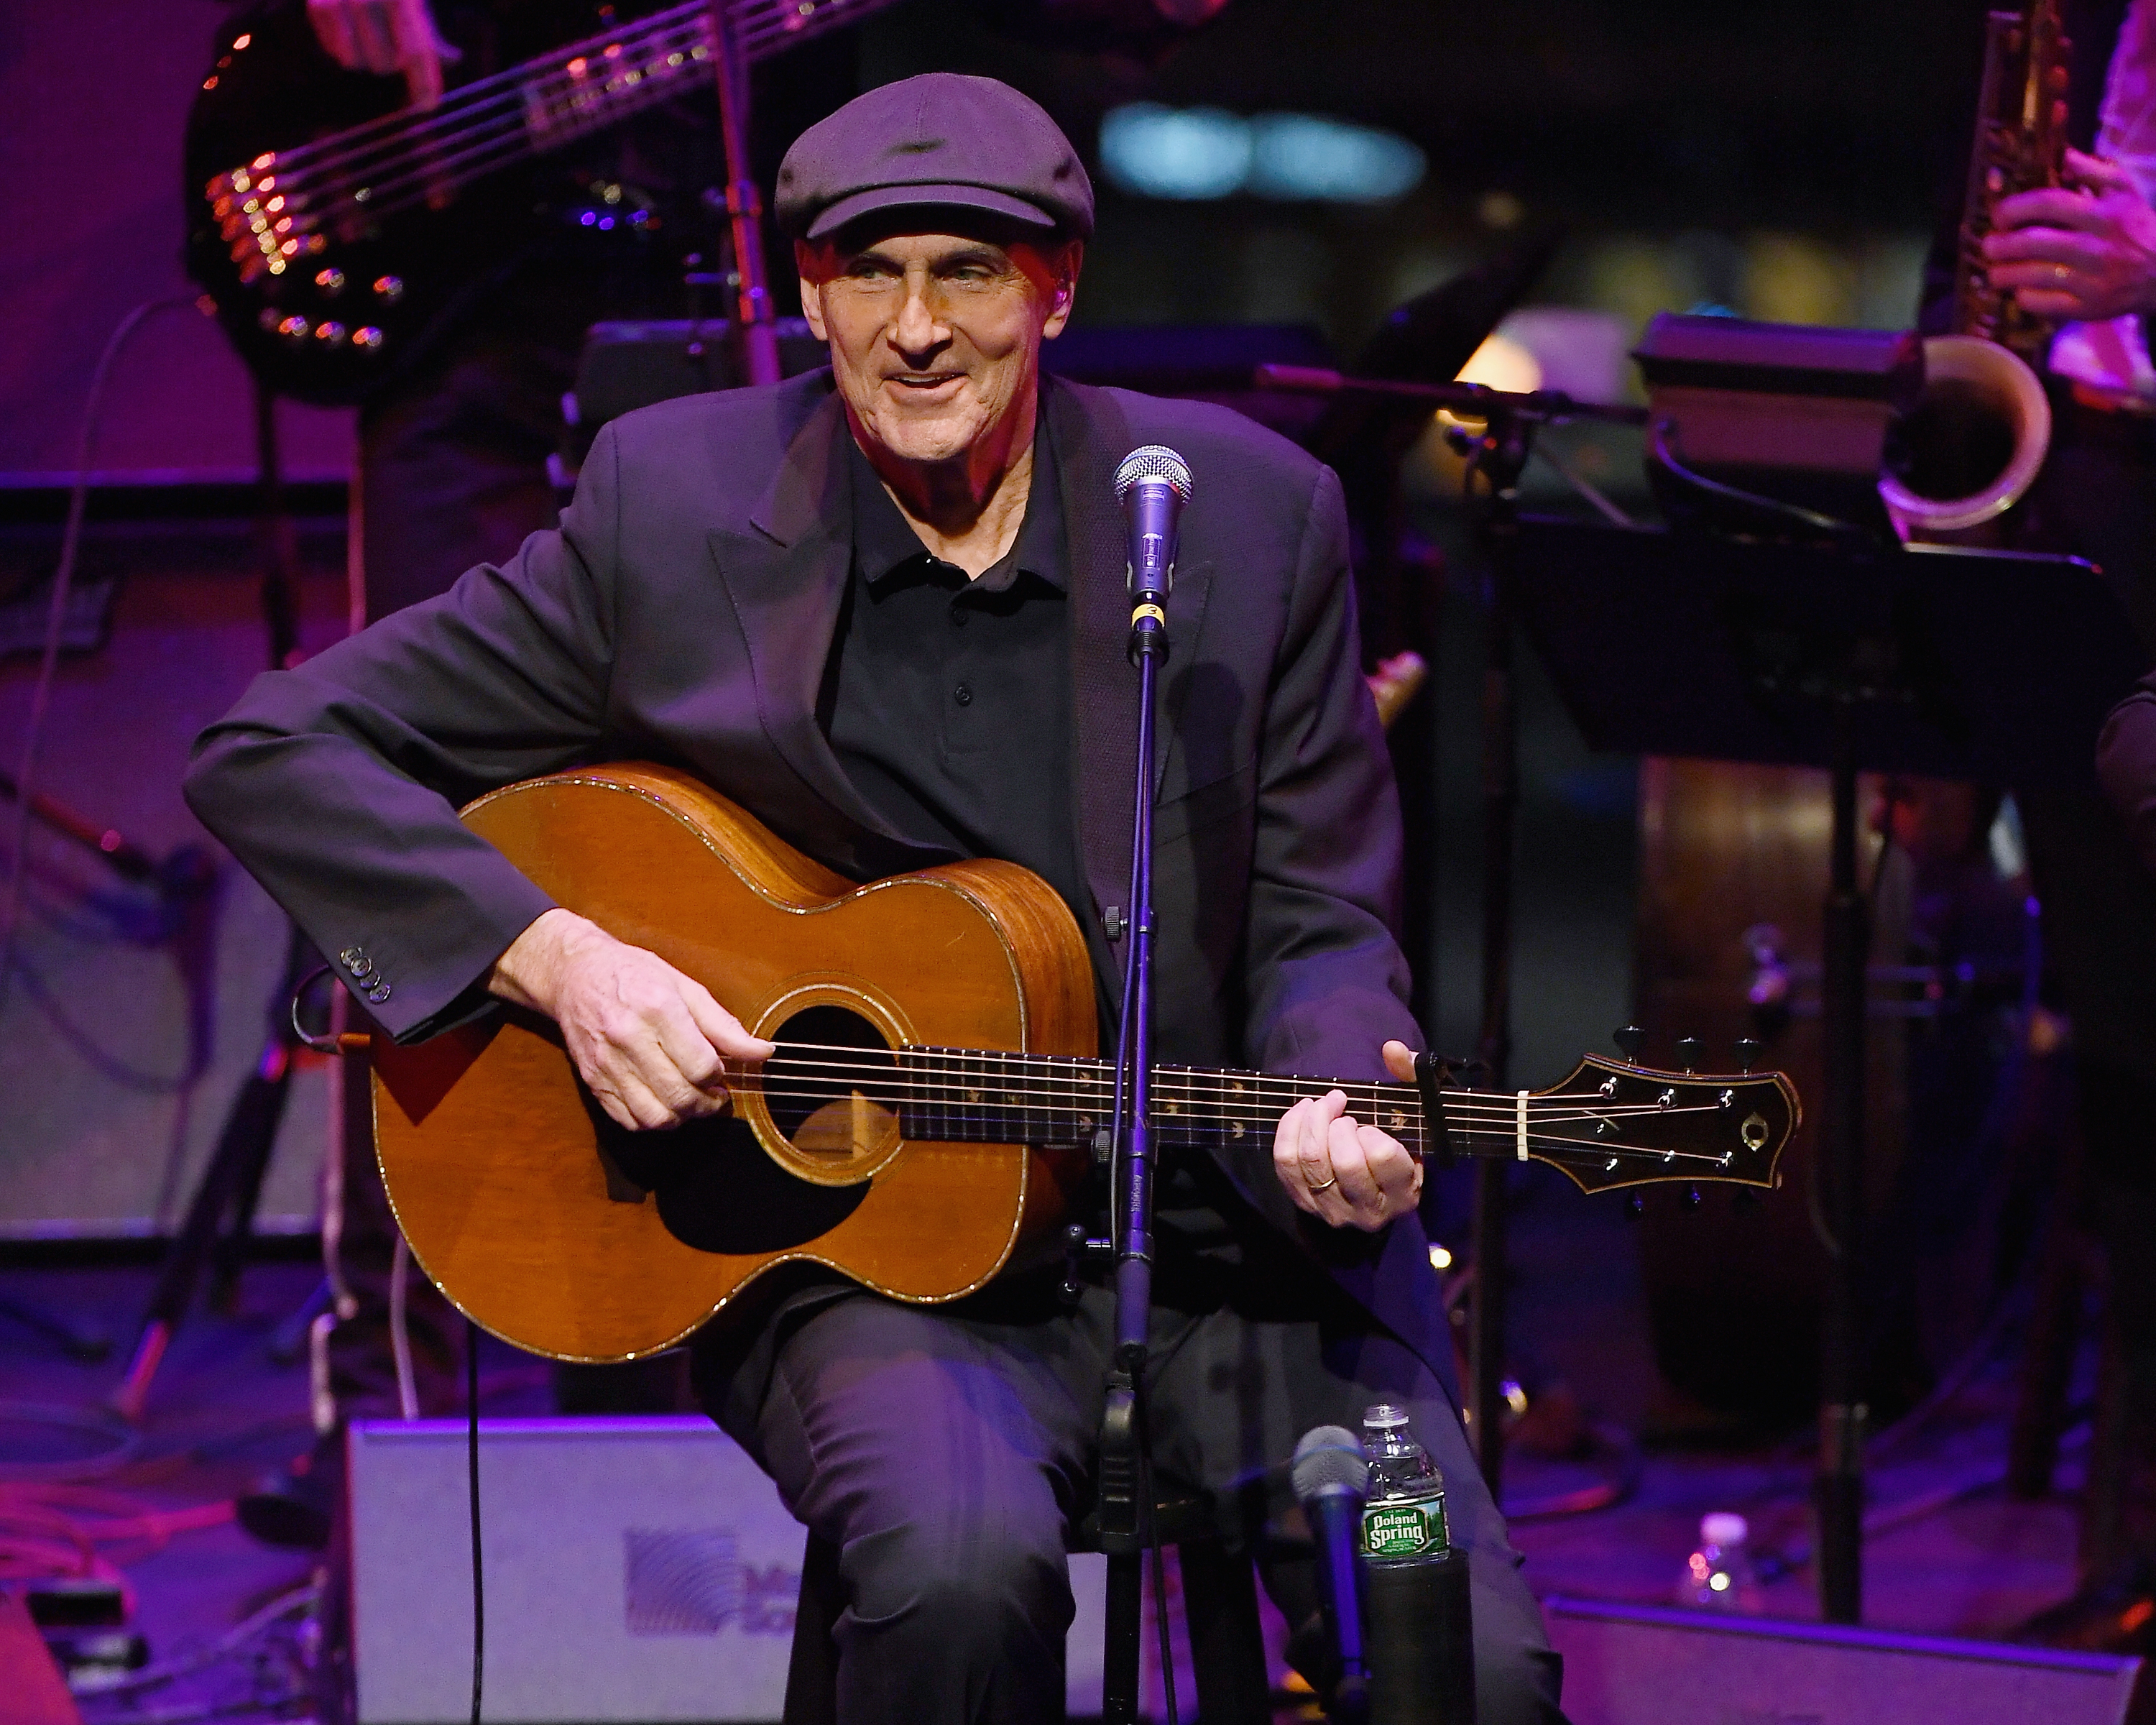 James Taylor is on stage during "The Nearness Of You Concert" at Jazz at Lincoln Center in New York City on January 28, 2019. | Source: Getty Images